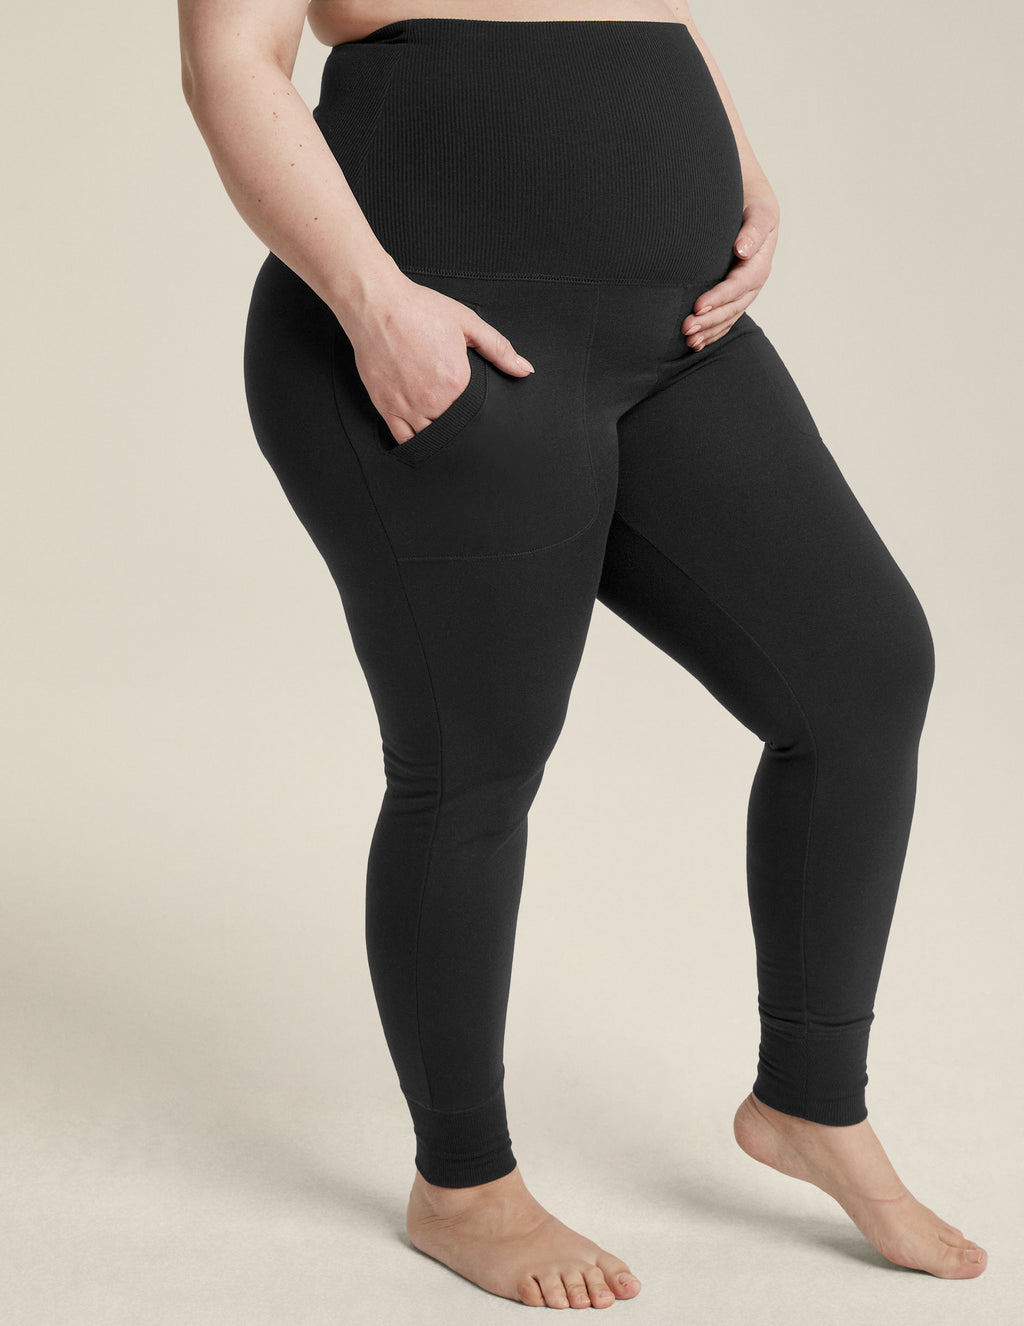 Maternity Exercise Leggings and Fulfilled by Co Ords Women Teyou